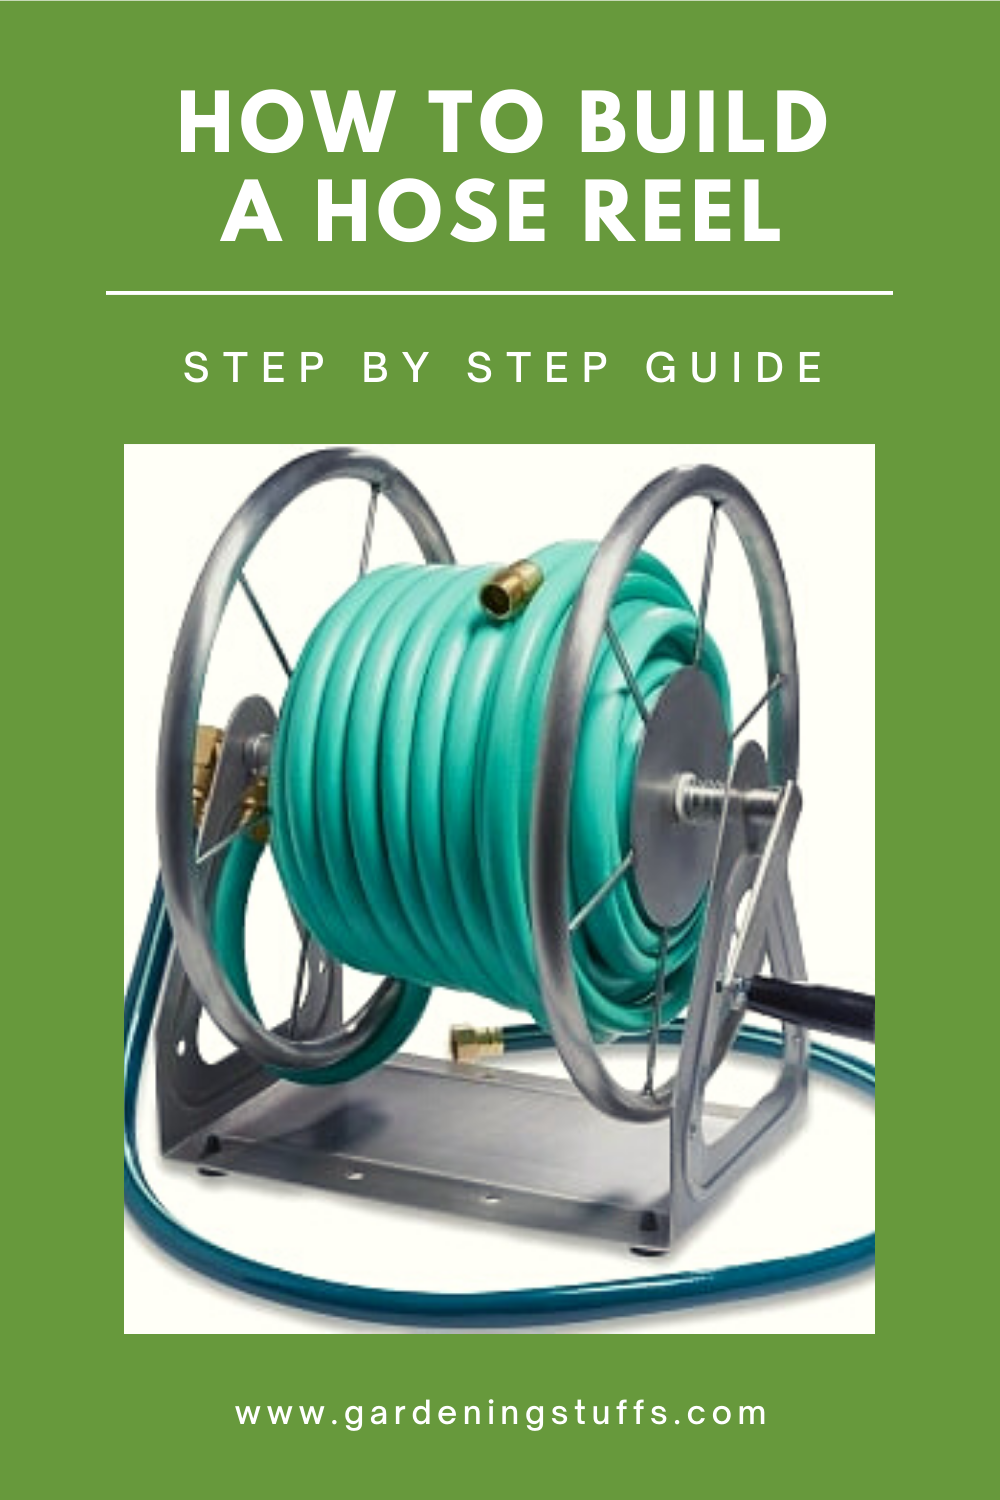 Check out this article, we have listed the process to build a DIY hose reel. This way, you won’t have to spend money on purchasing one from the market.